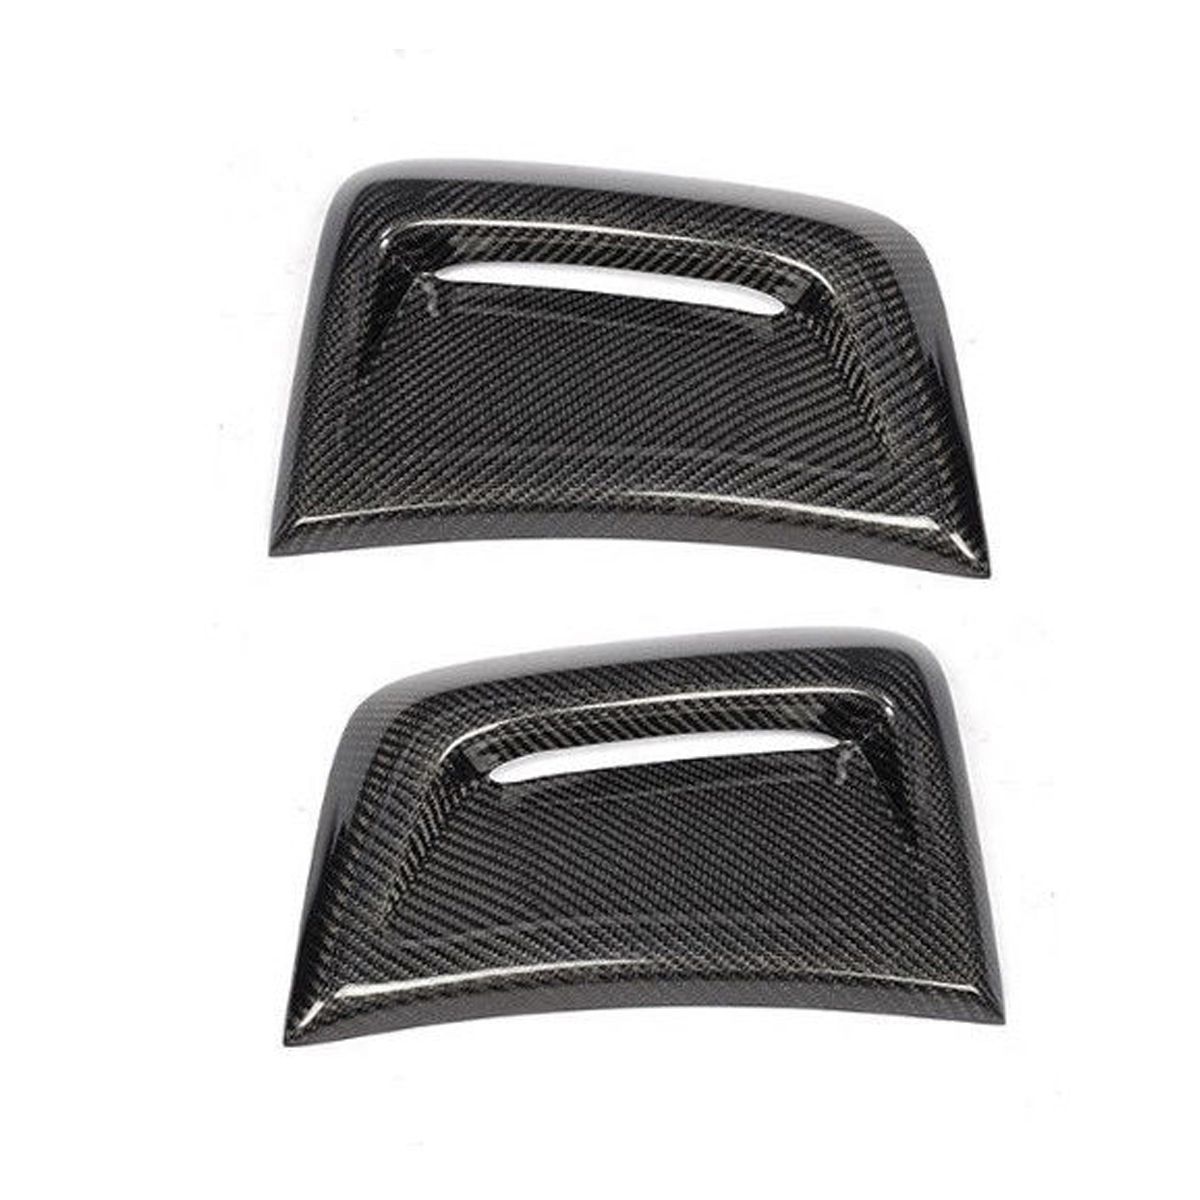 Car-Carbon-Fiber-Side-Air-Insert-Vent-Cover-For-Benz-W204-C63-AMG-1239740